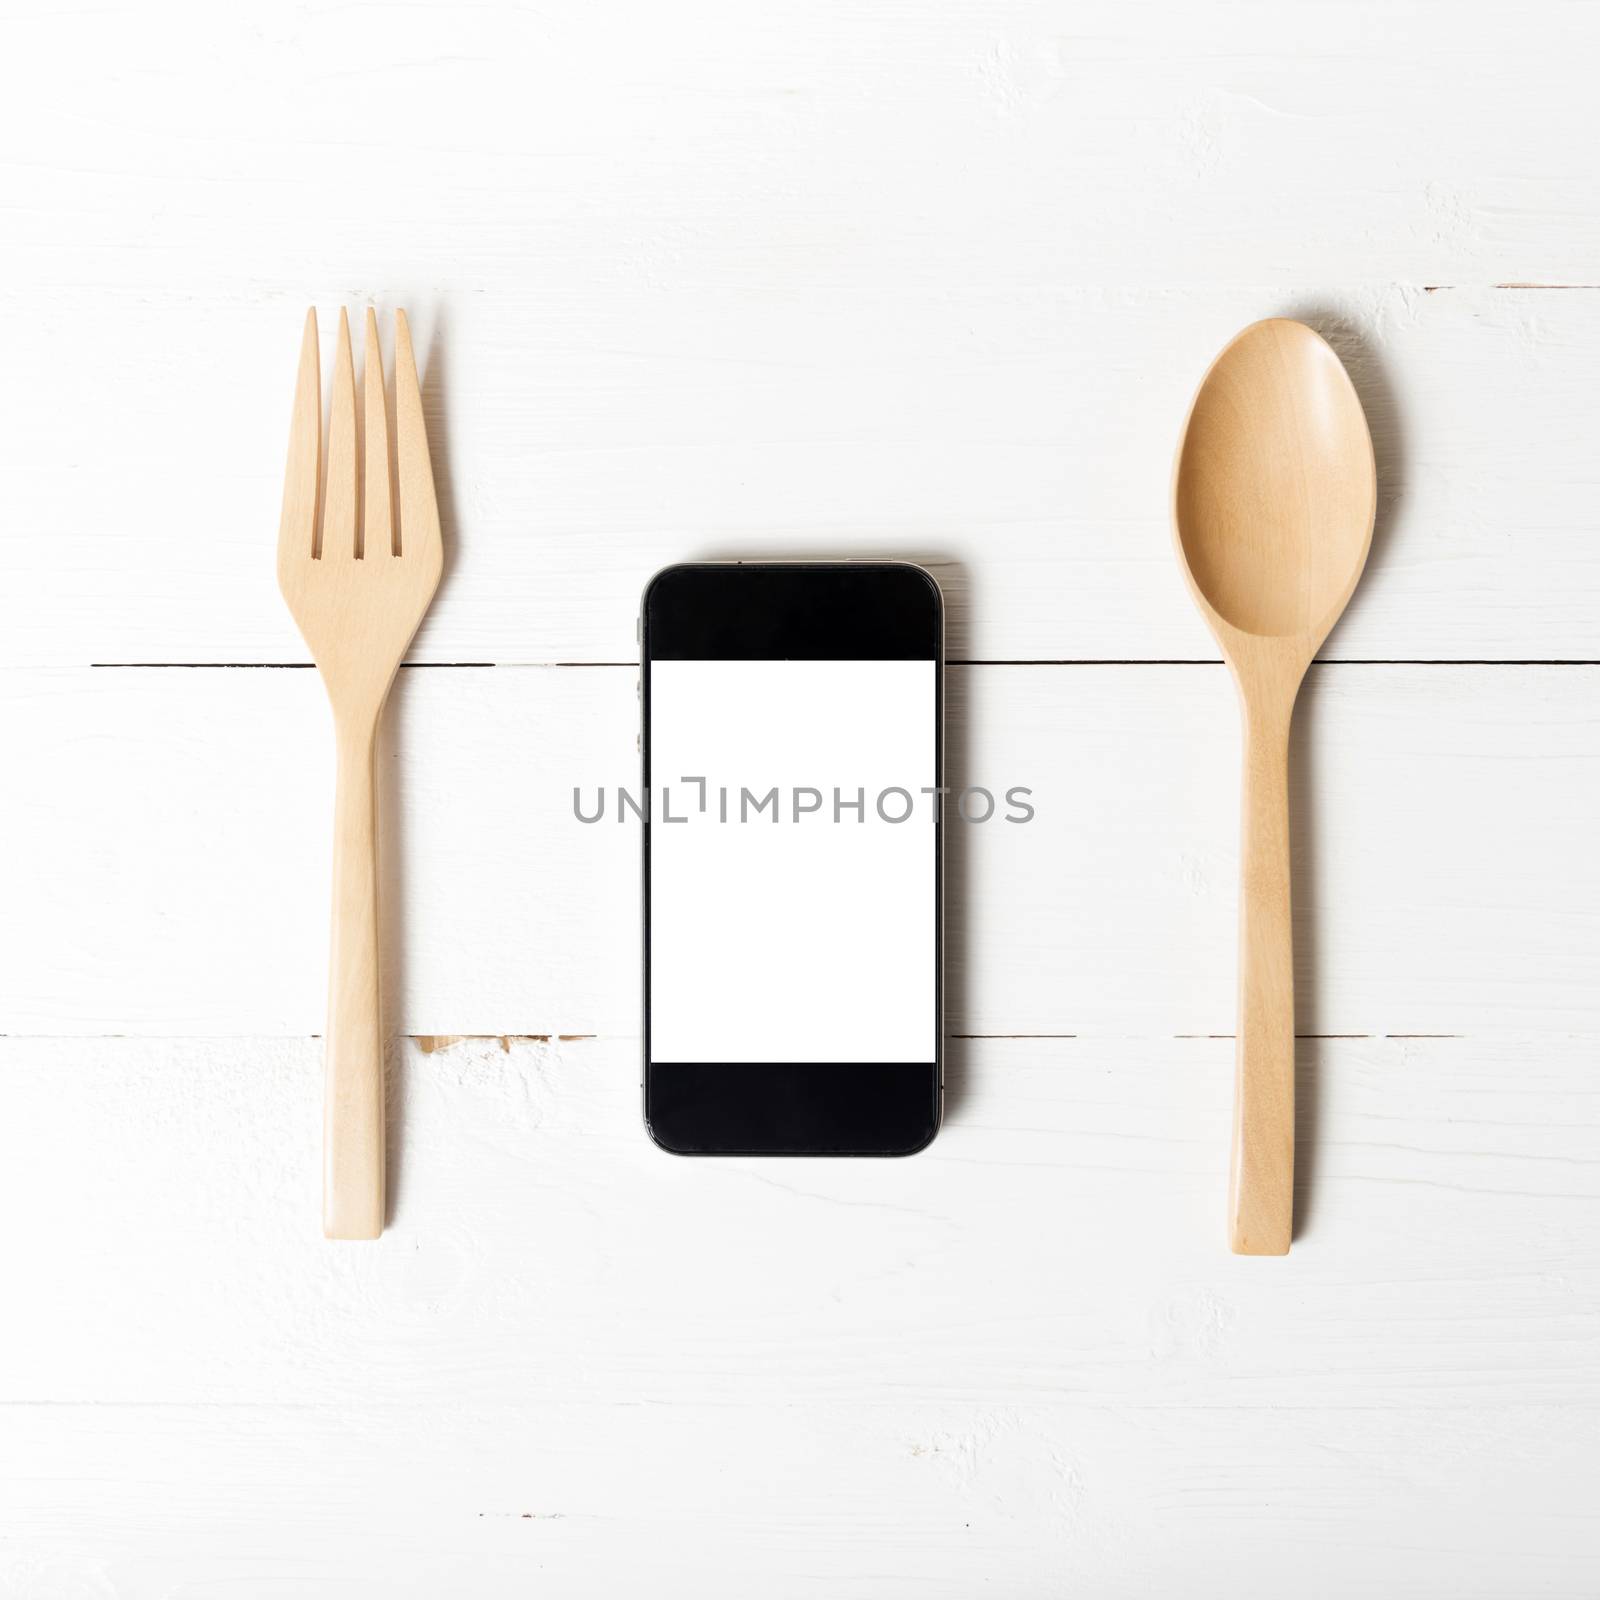 spoon and smart phone concept eating social over white table background